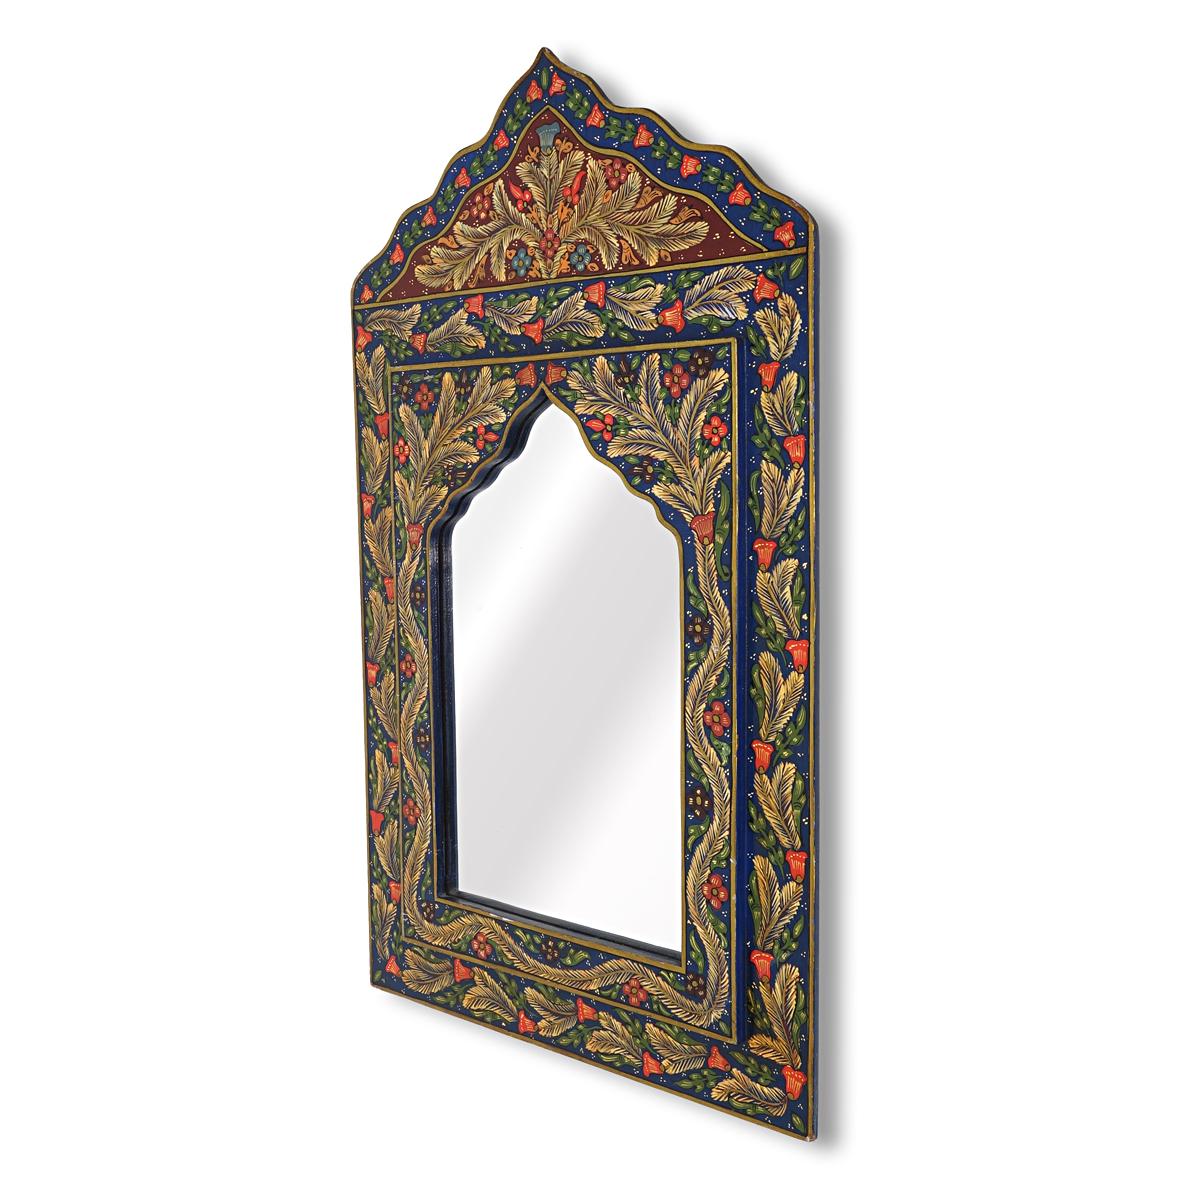 This exciting mirror would not look out of place in a decor telling the stories out of 1001 Nights.
Its clearly oriental vibe can especially be noticed in the shape in which the wood has been sawn and the color and shape patterns it is decorated